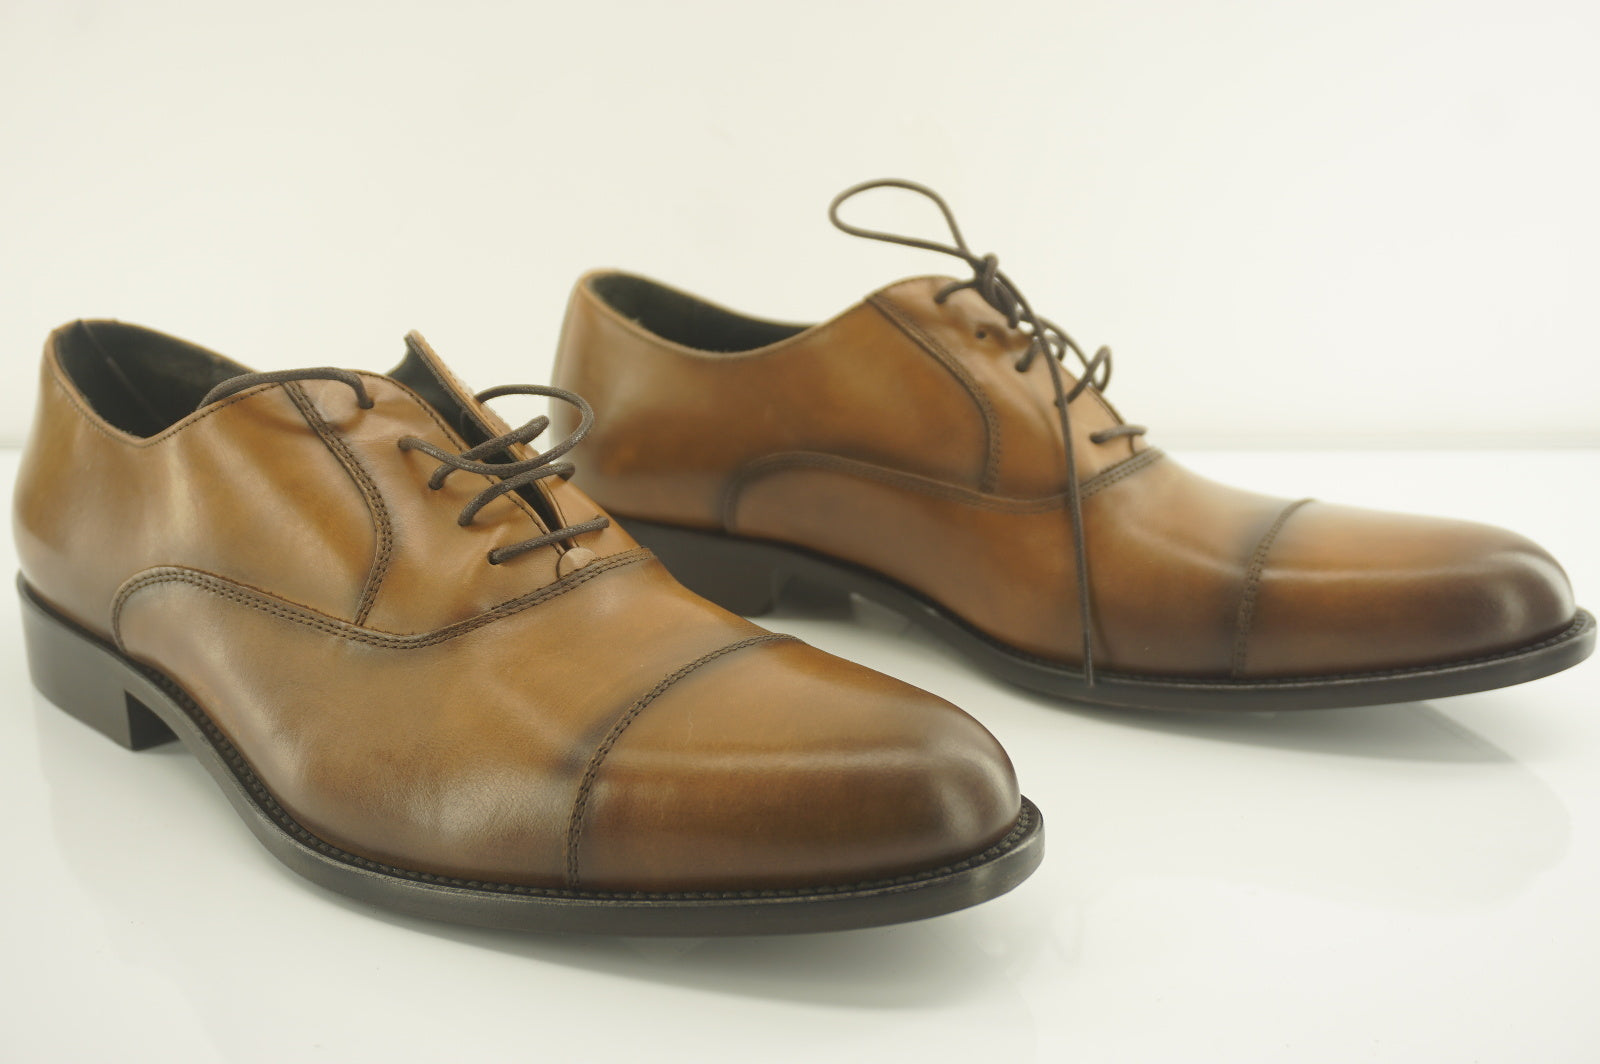 To Boot New York Caufield Men's Brown Leather Cap Toe Oxfords Size 11.5 D $395